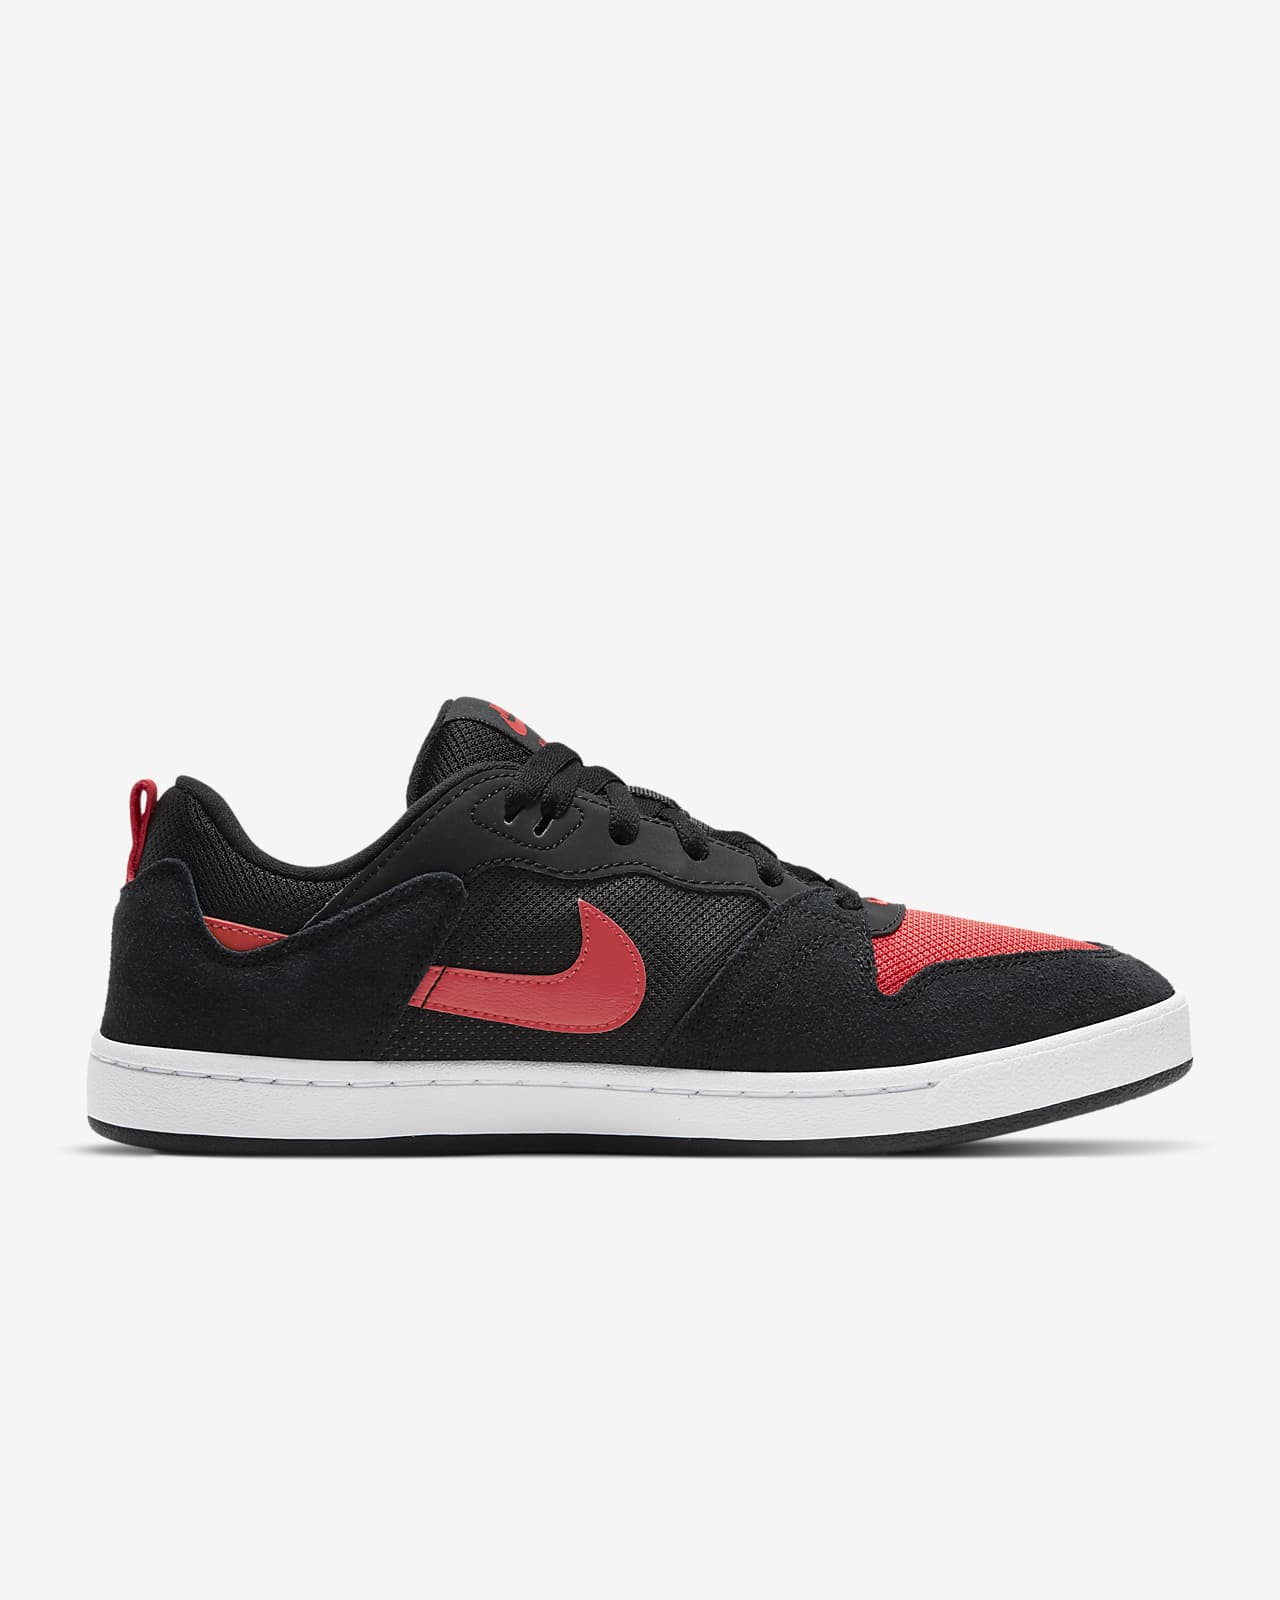 nike sb shoes with strap